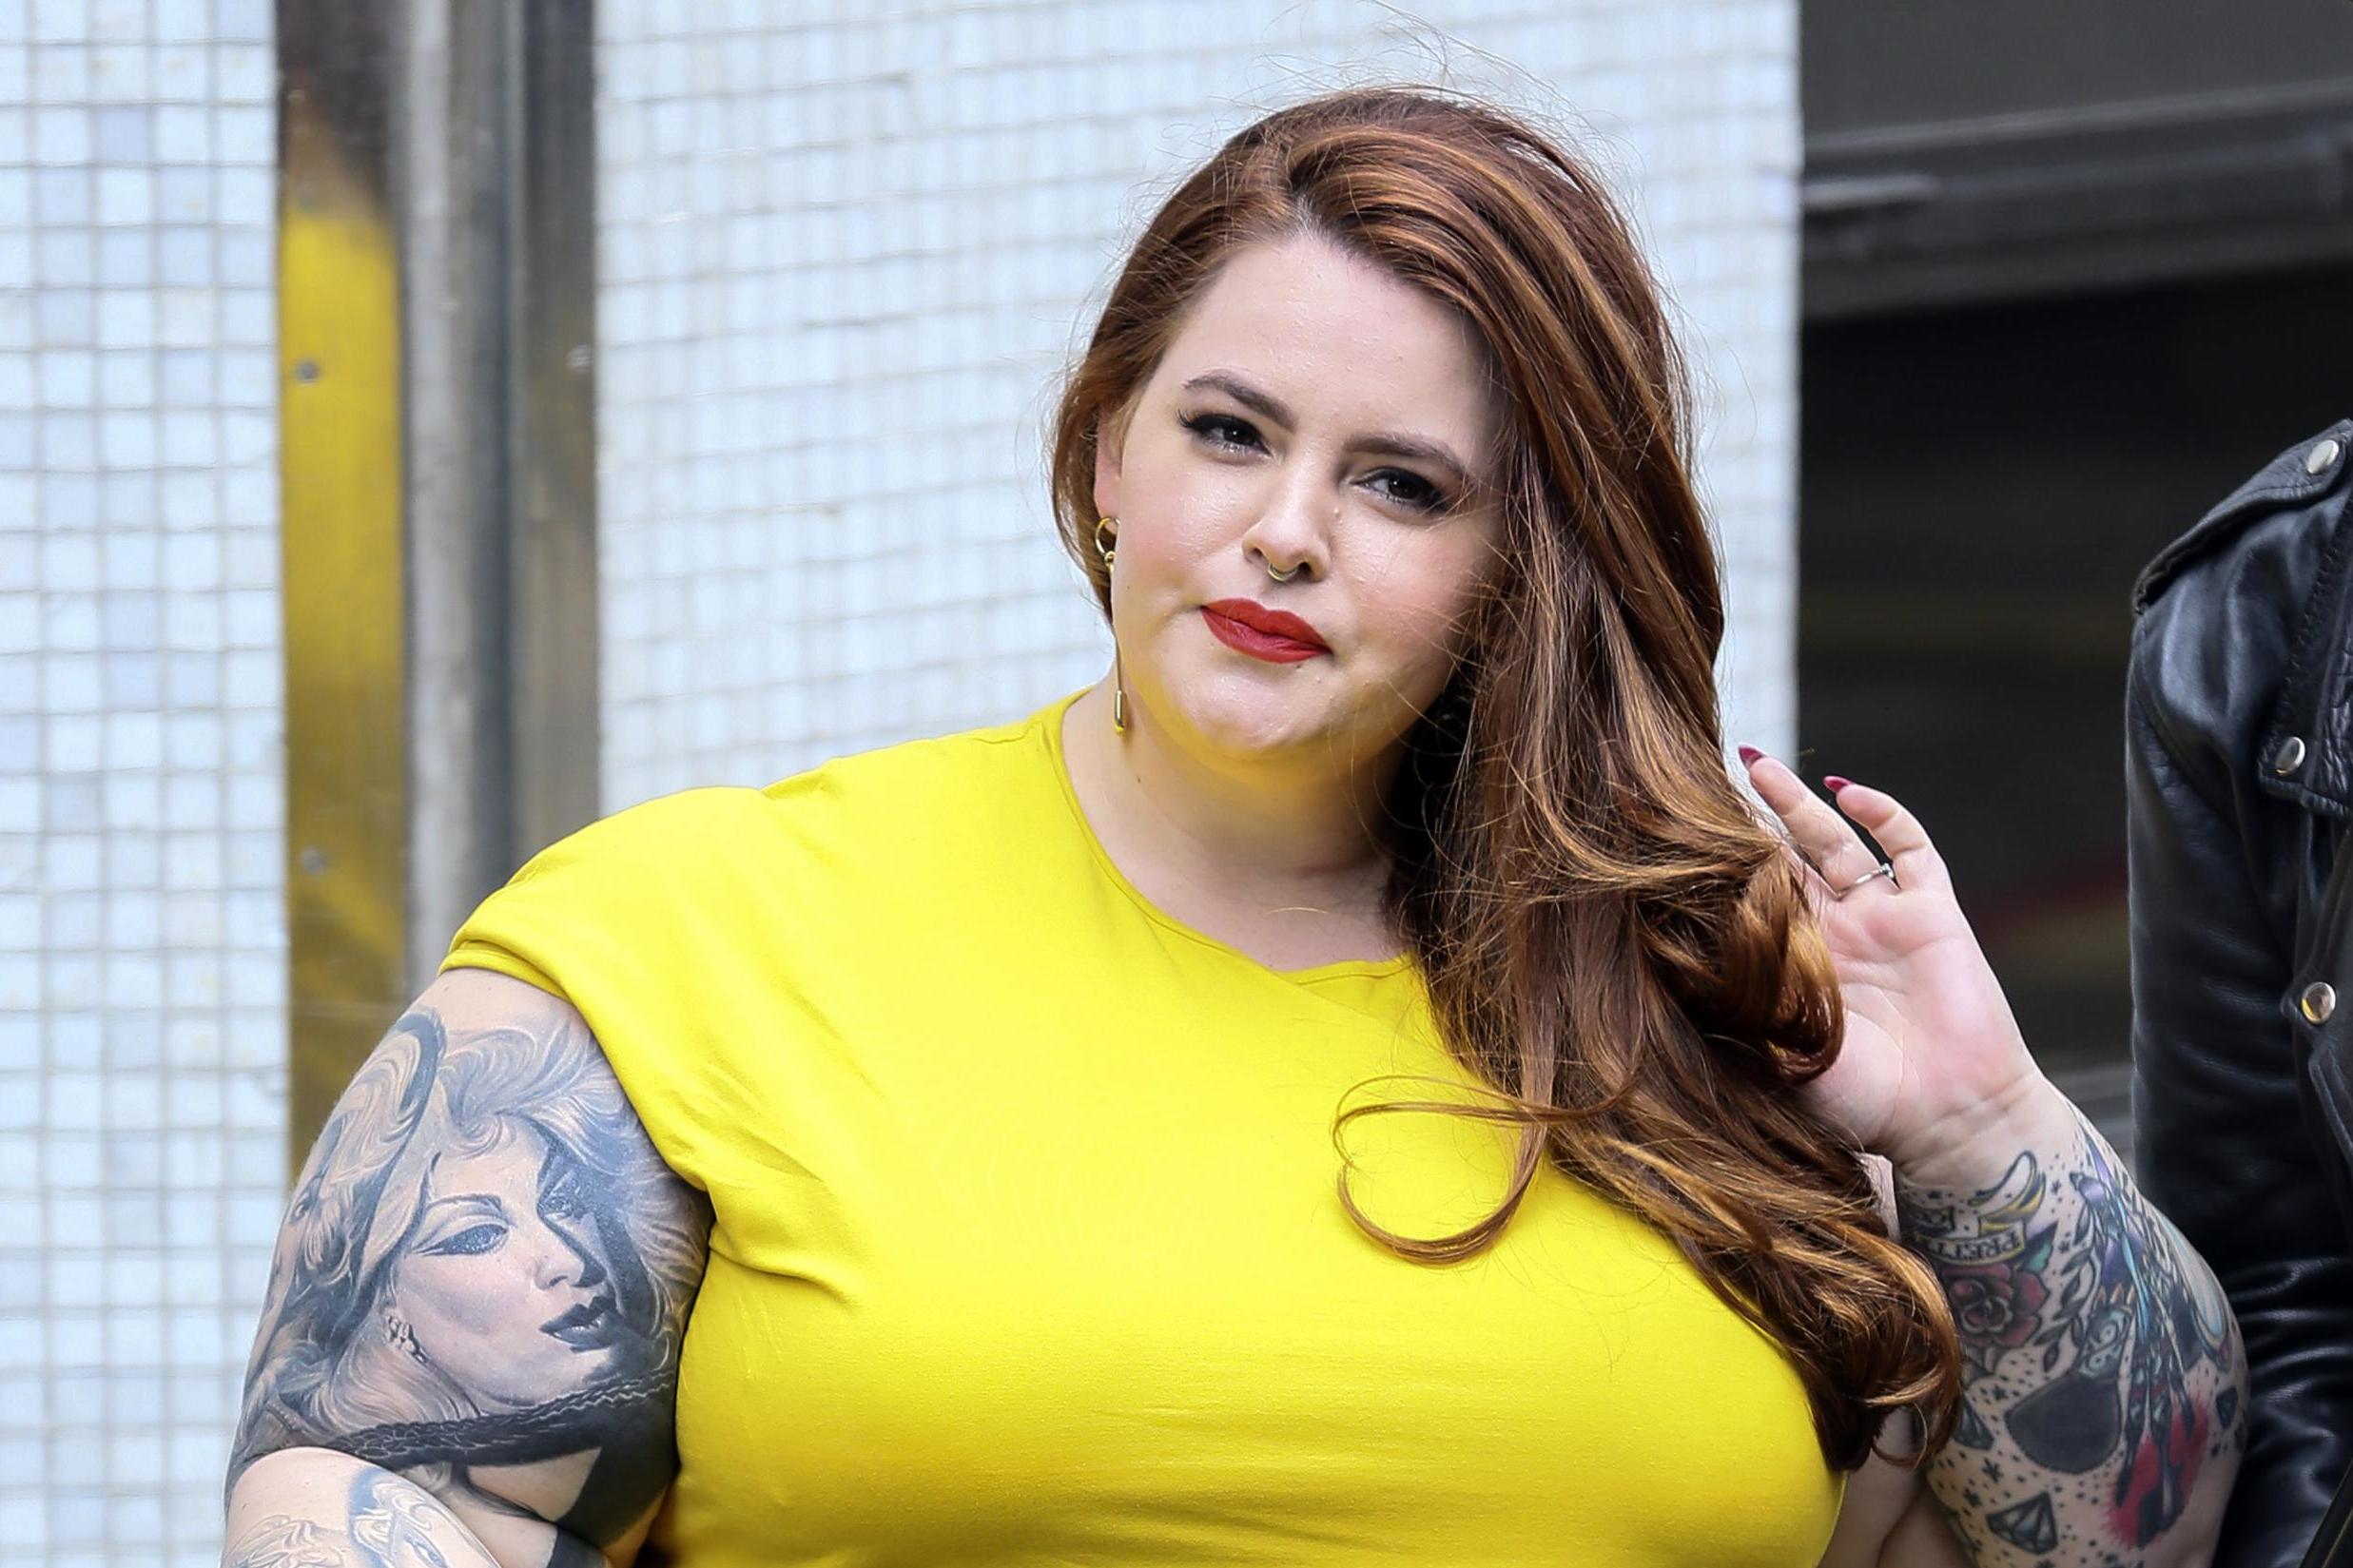 People laugh in my face when they find out I'm a model': Tess Holliday on  why plus-size models still aren't taken seriously, The Independent